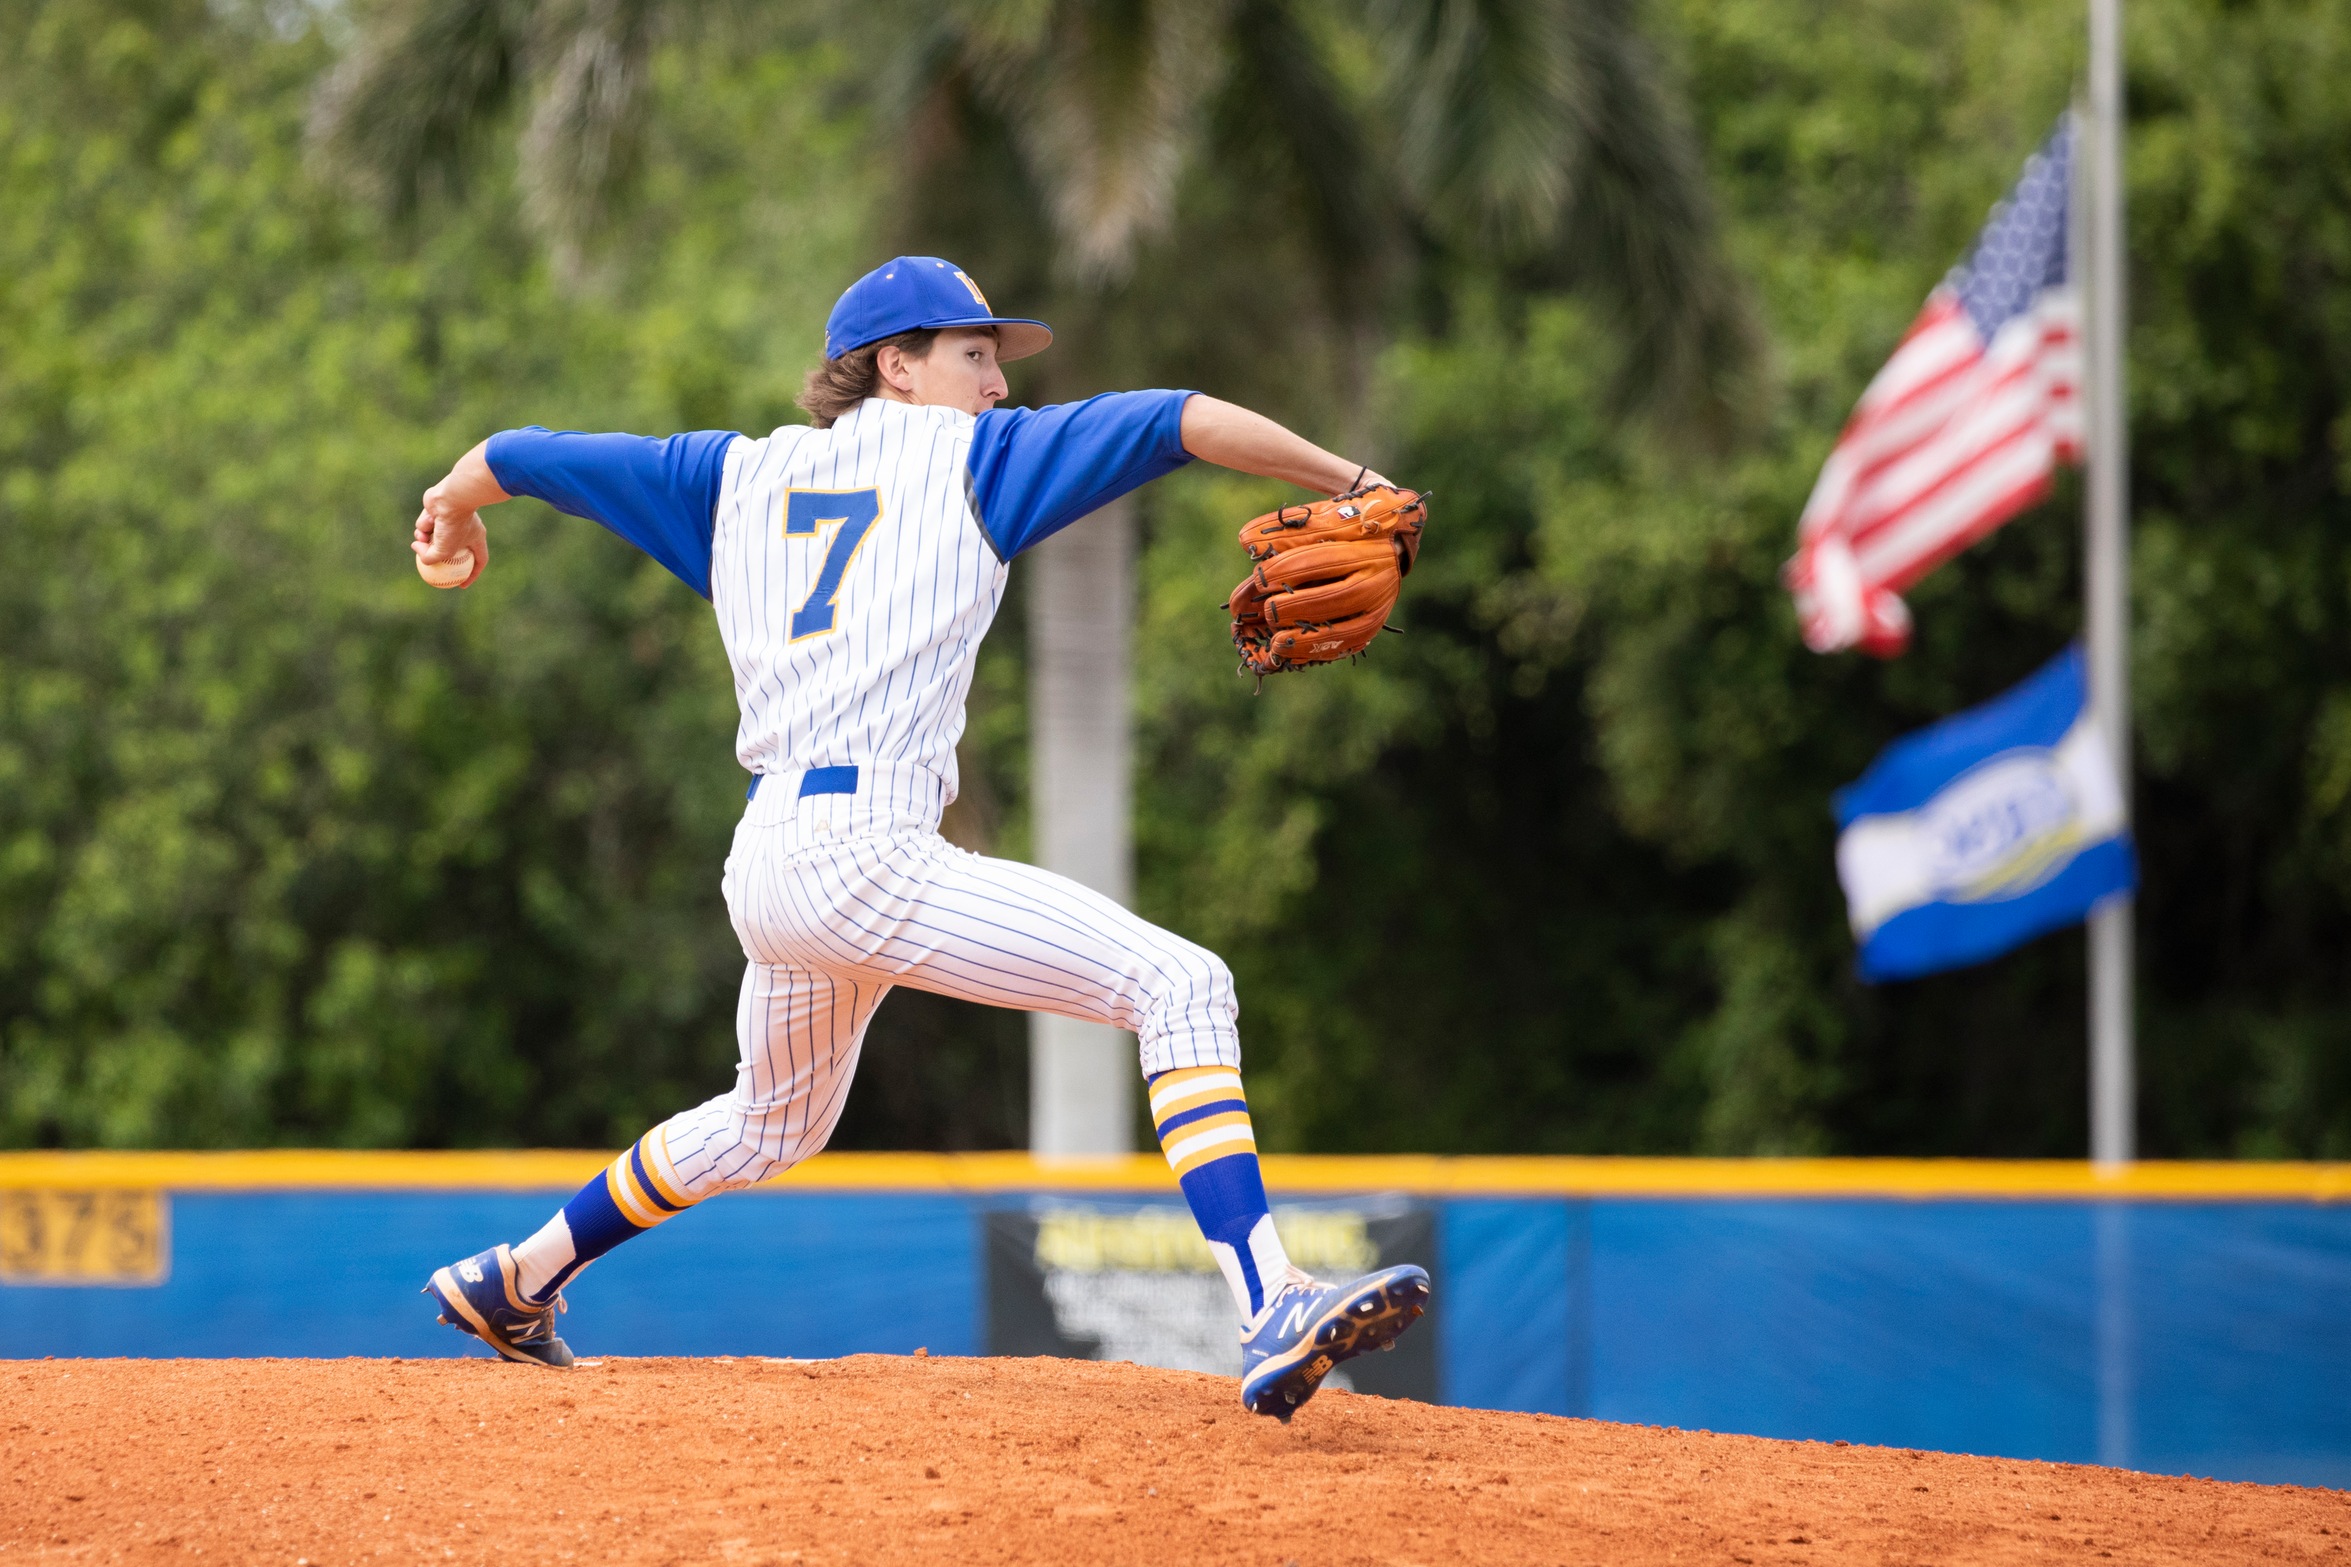 Indian River State College Pioneers Falls to Eastern State College After Eighth Inning Score